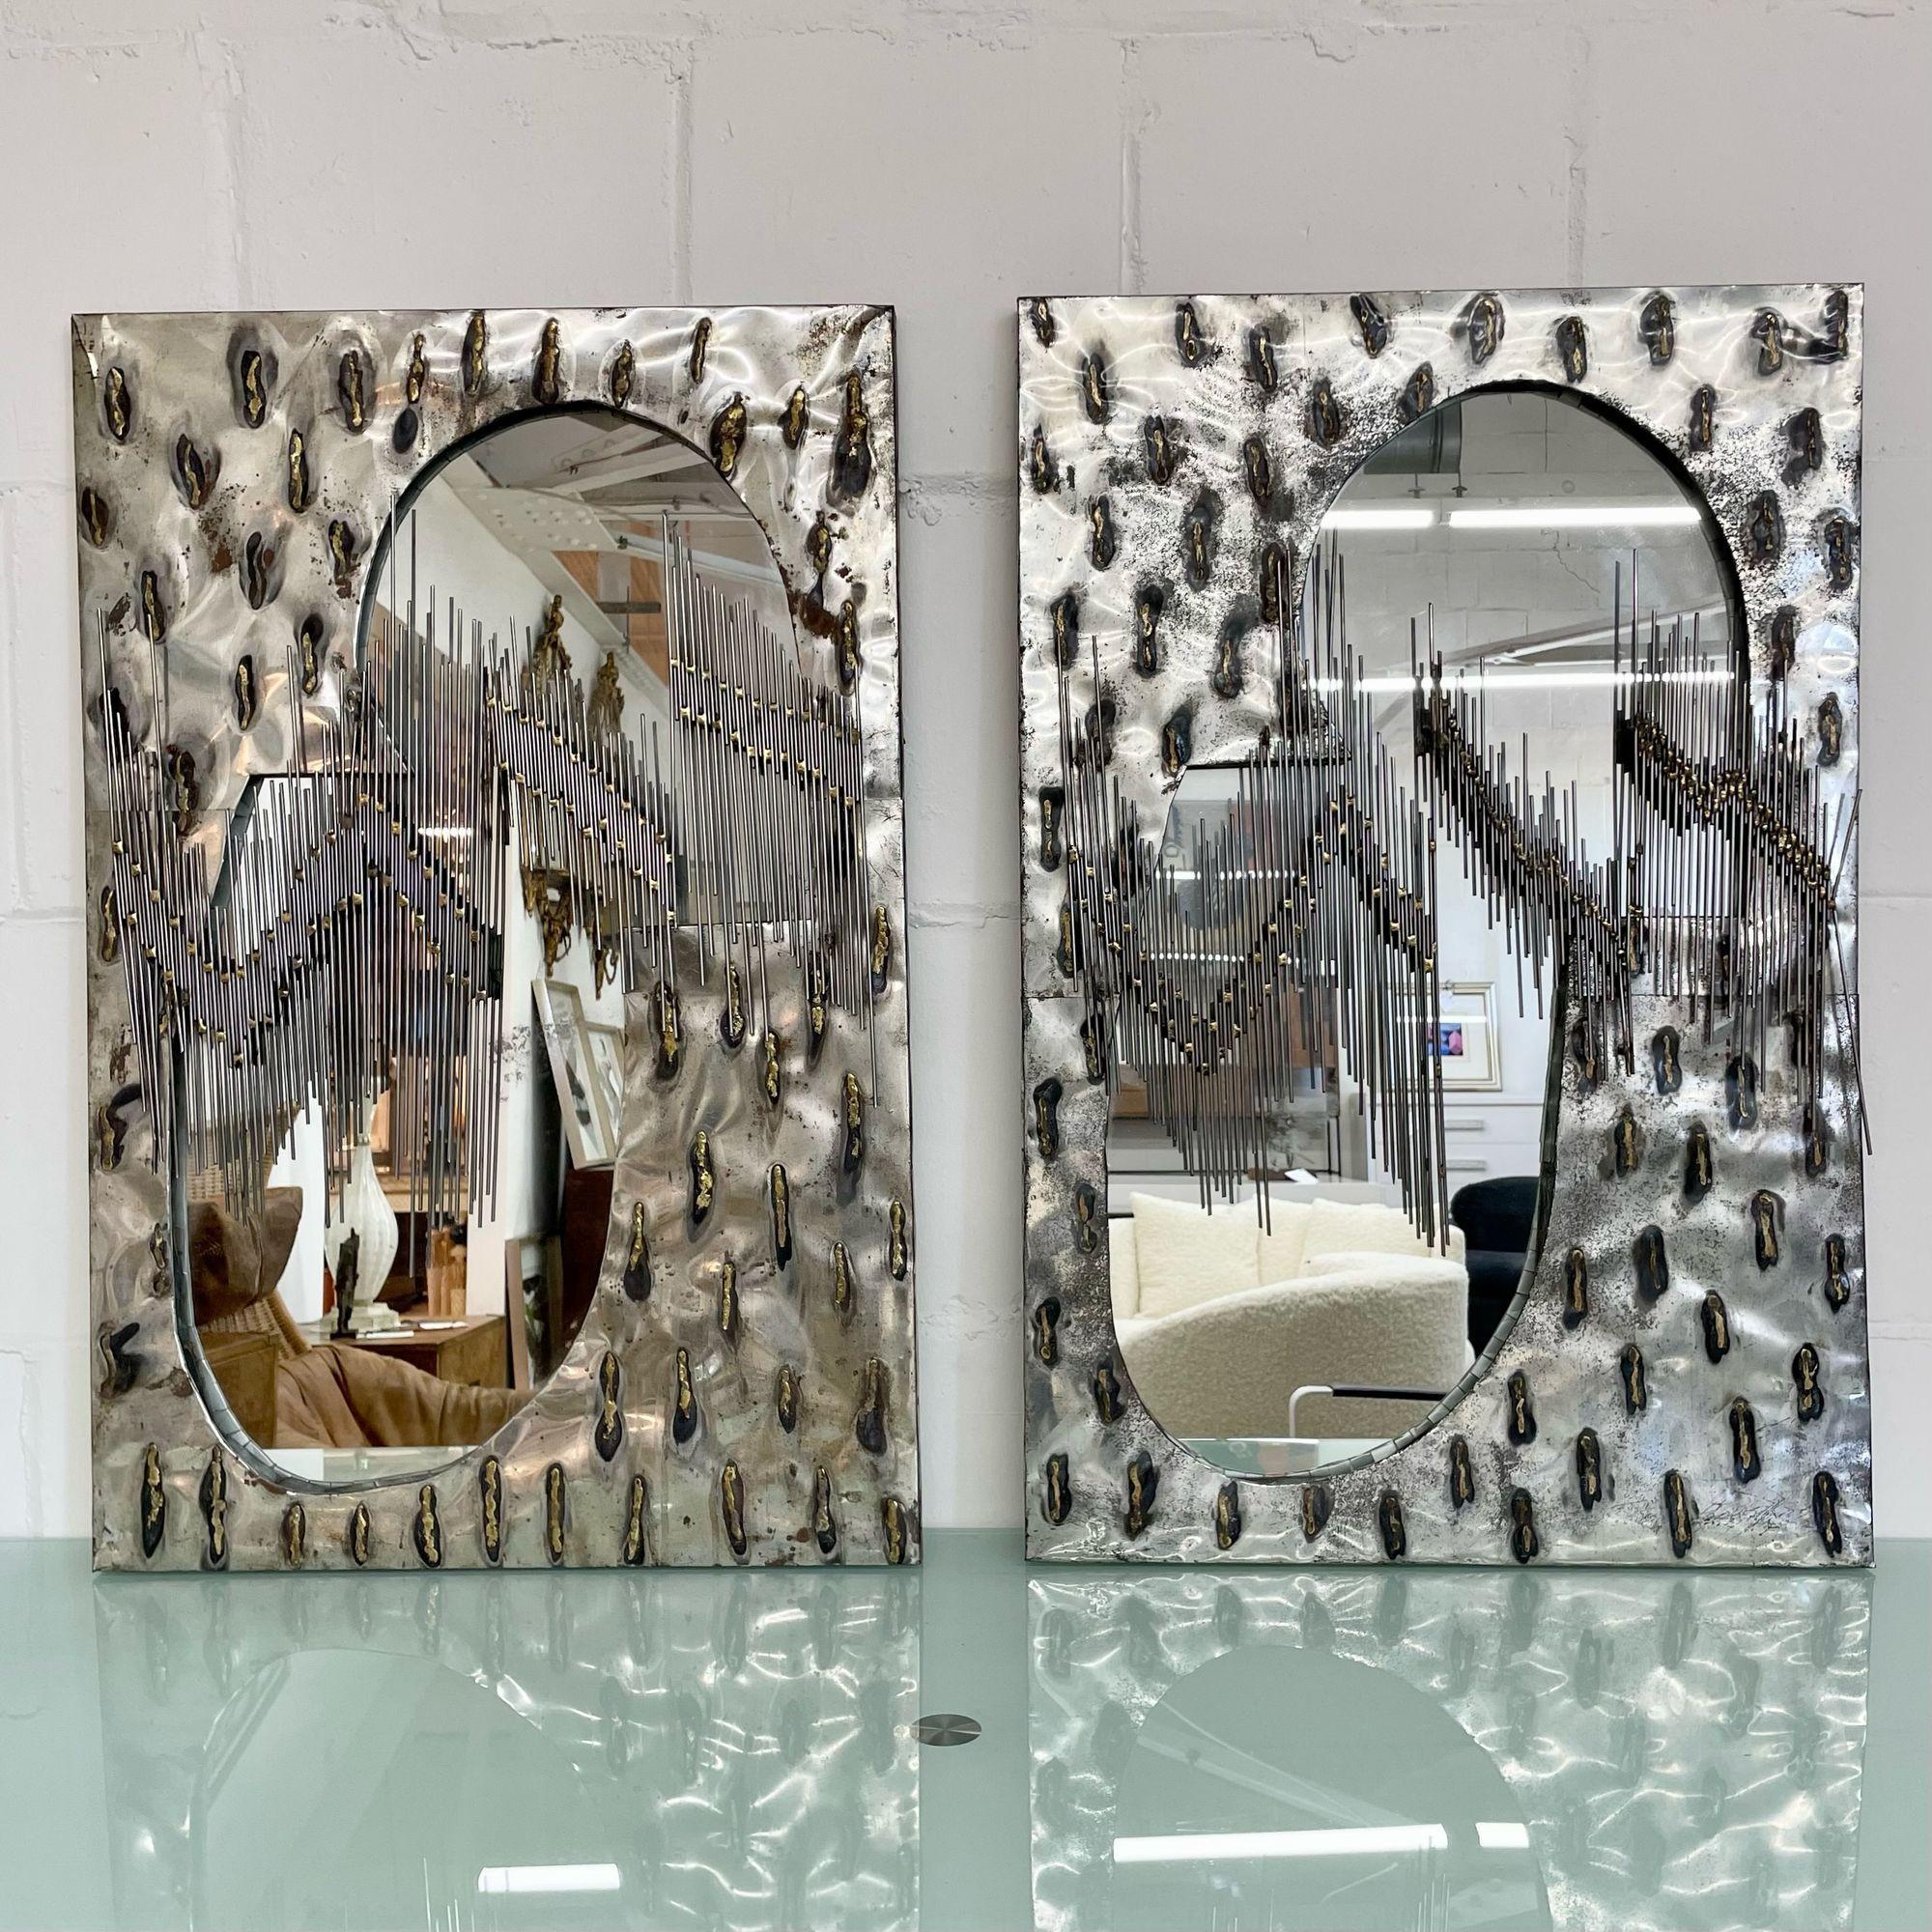 Pair of Brutalist Mid-Century Modern Paul Evans Style Mirrors, Wall / Console
 
Studio made artisan mirrors with welded rods and intricate brutalist detail. Two mirrors are available - the pair can be split.
 
Steel, Glass
American, c. 2000s
 
35.5H